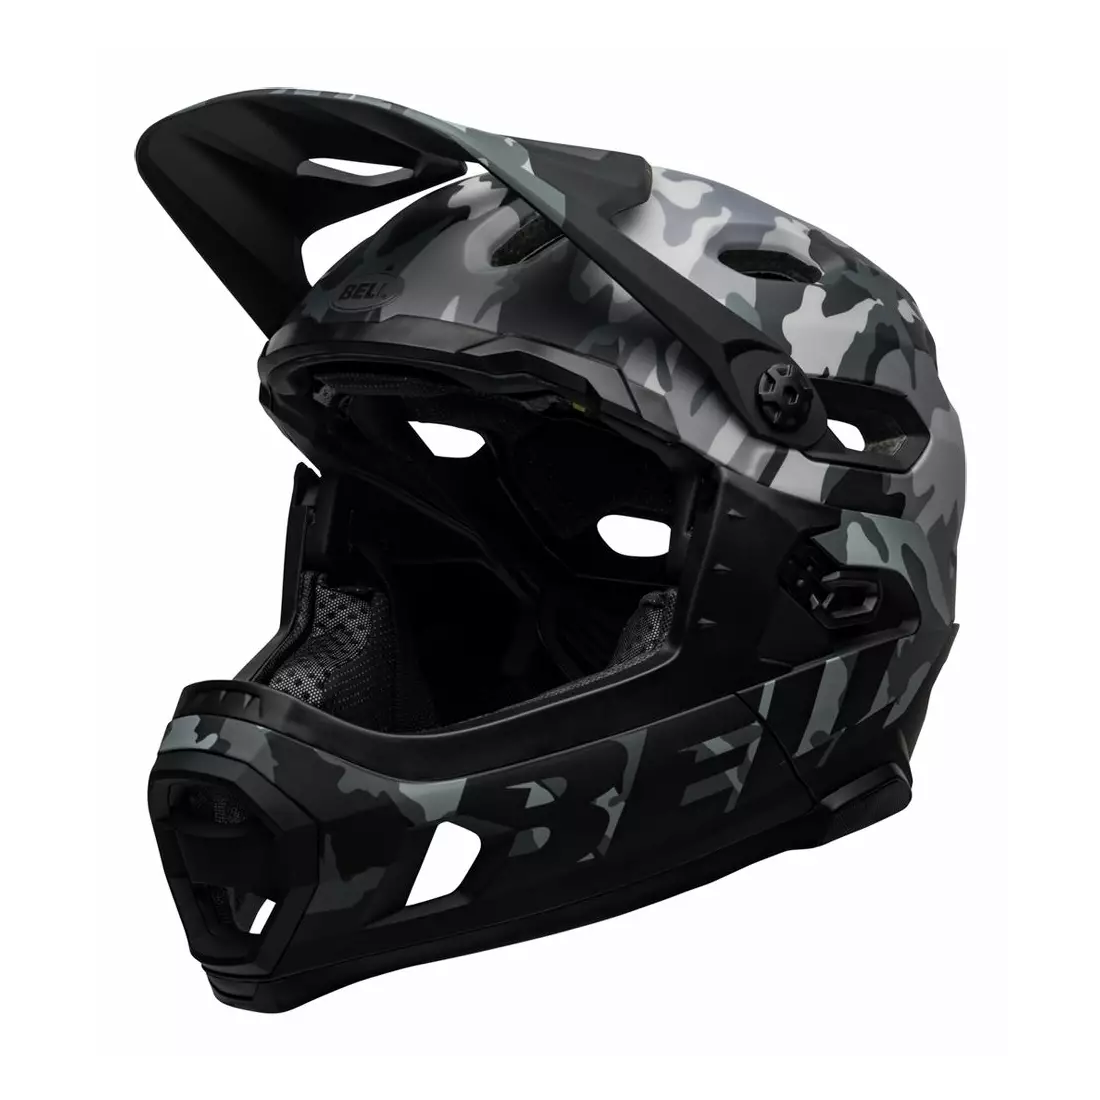 BELL SUPER DH MIPS SPHERICAL full face bicycle helmet, matte gloss black camo